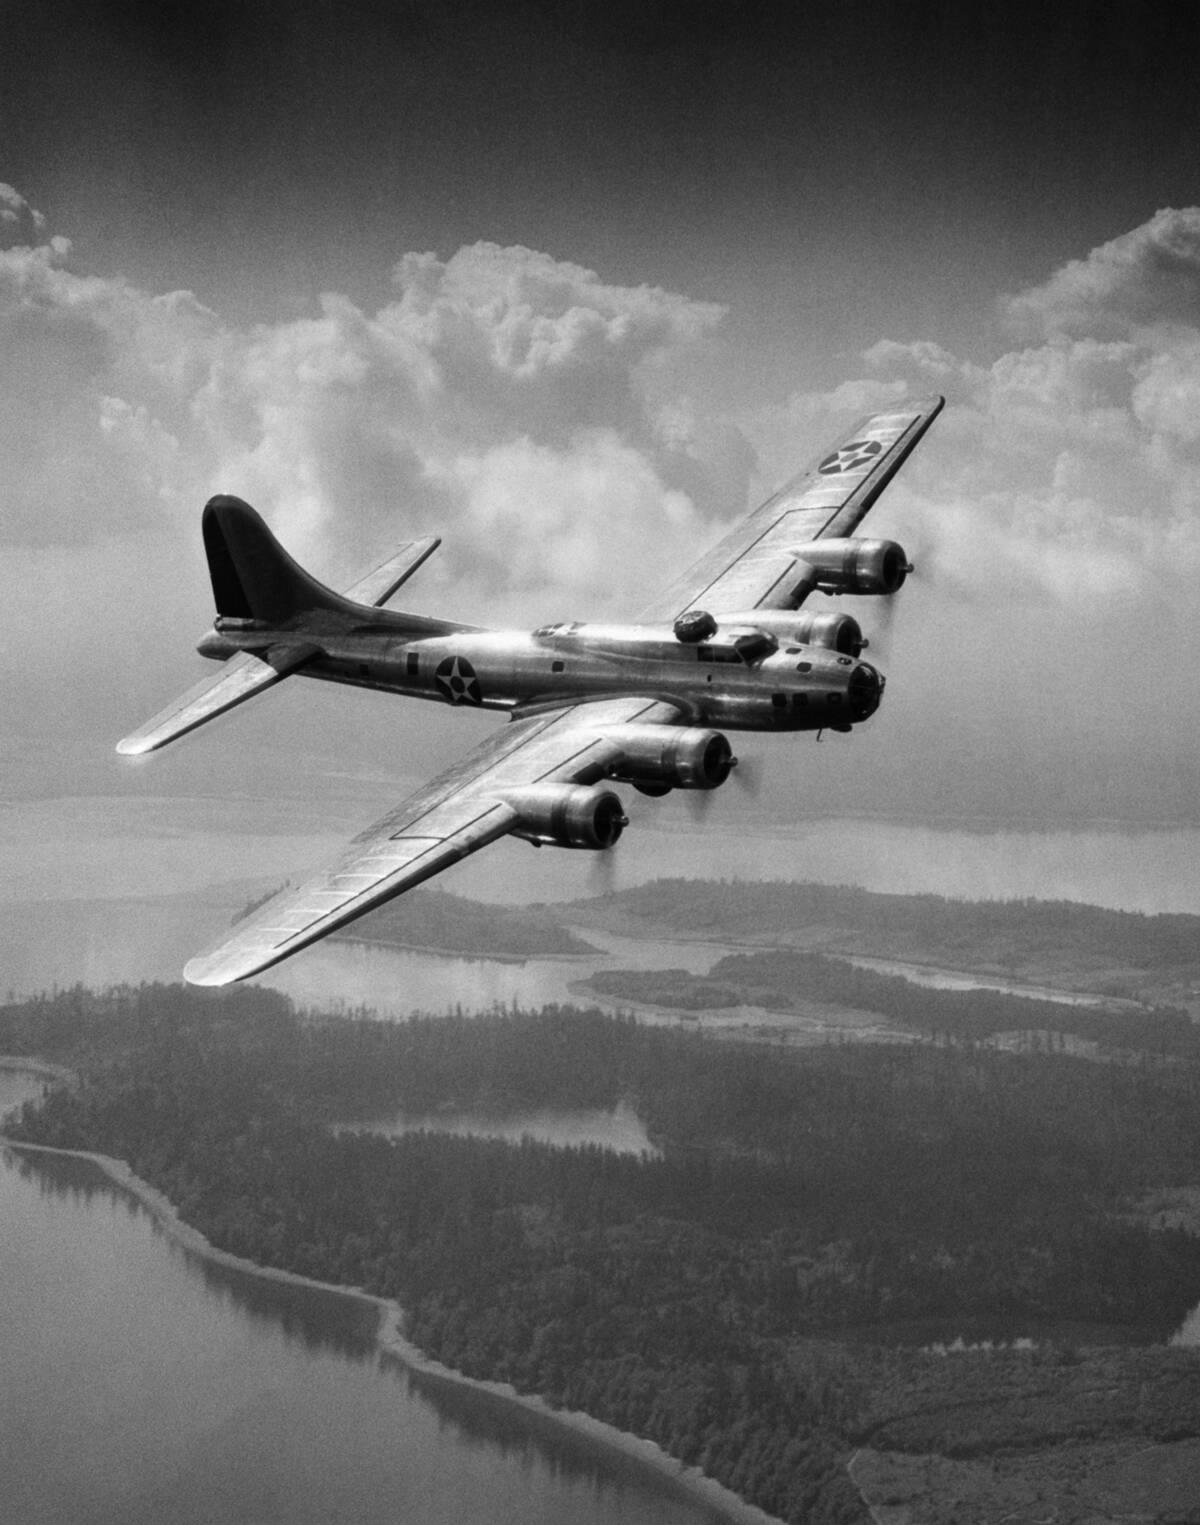 <p>However, the severe setbacks that arose with this campaign don't exactly make it surprising to learn that it was the first time the United States had attempted something like this. After all, it didn't take any action from the enemy to take some of these bombers out of the fight.</p> <p>According to the <i>Pearl Harbor Aviation Museum</i>, this was because some found themselves out of commission before they had even taken off. Two B-17s collided on the runway and had to stay grounded, while another never made it into the air due to its engine's failure to start.</p>